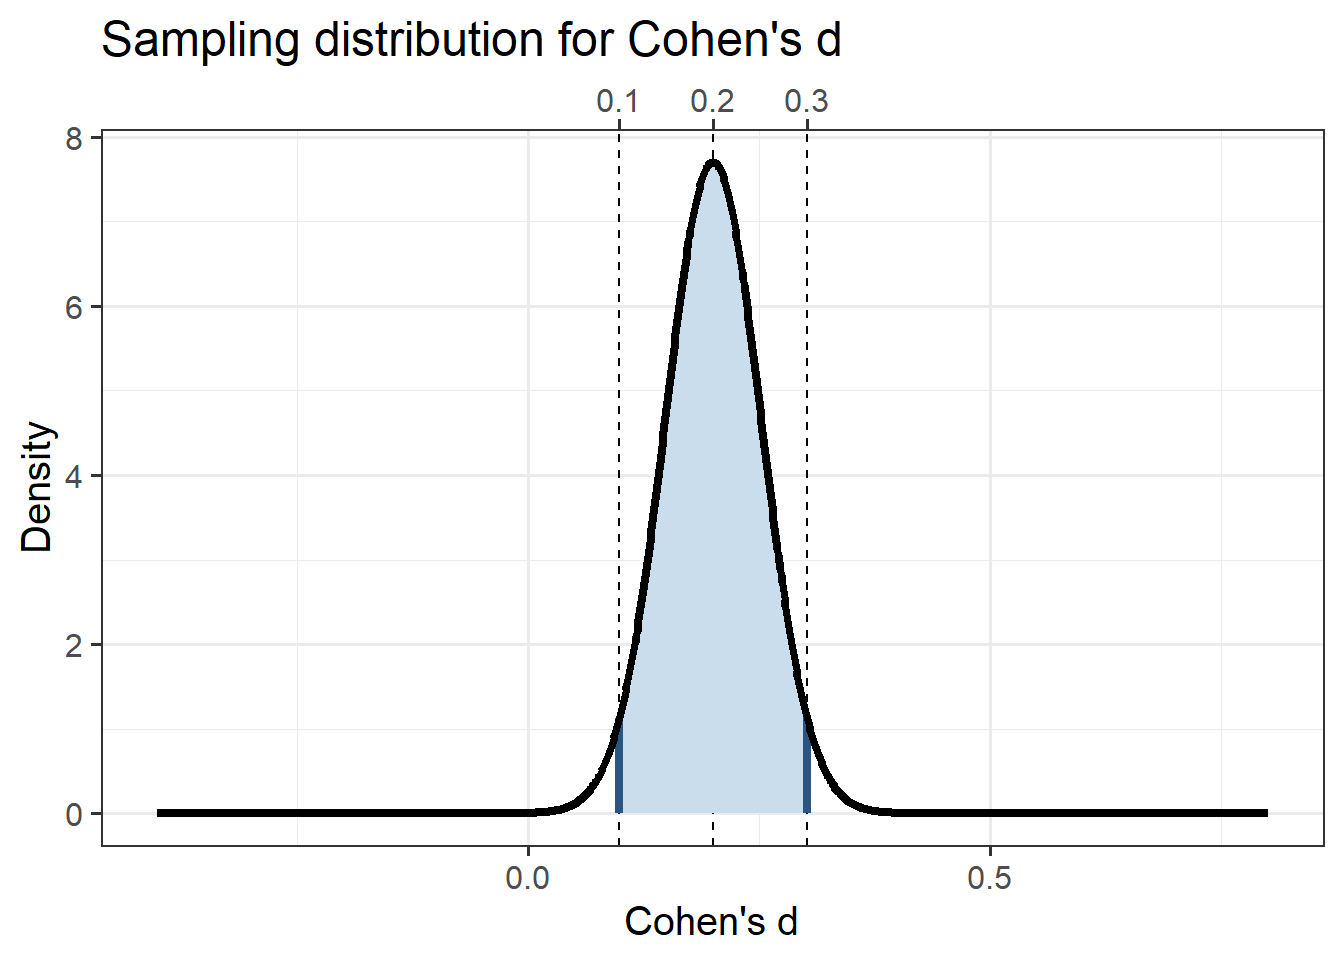 Cohen's d's sampling distribution for a small population effect size (d = 0.2) and for a 2-cell design with 750 participants per group.